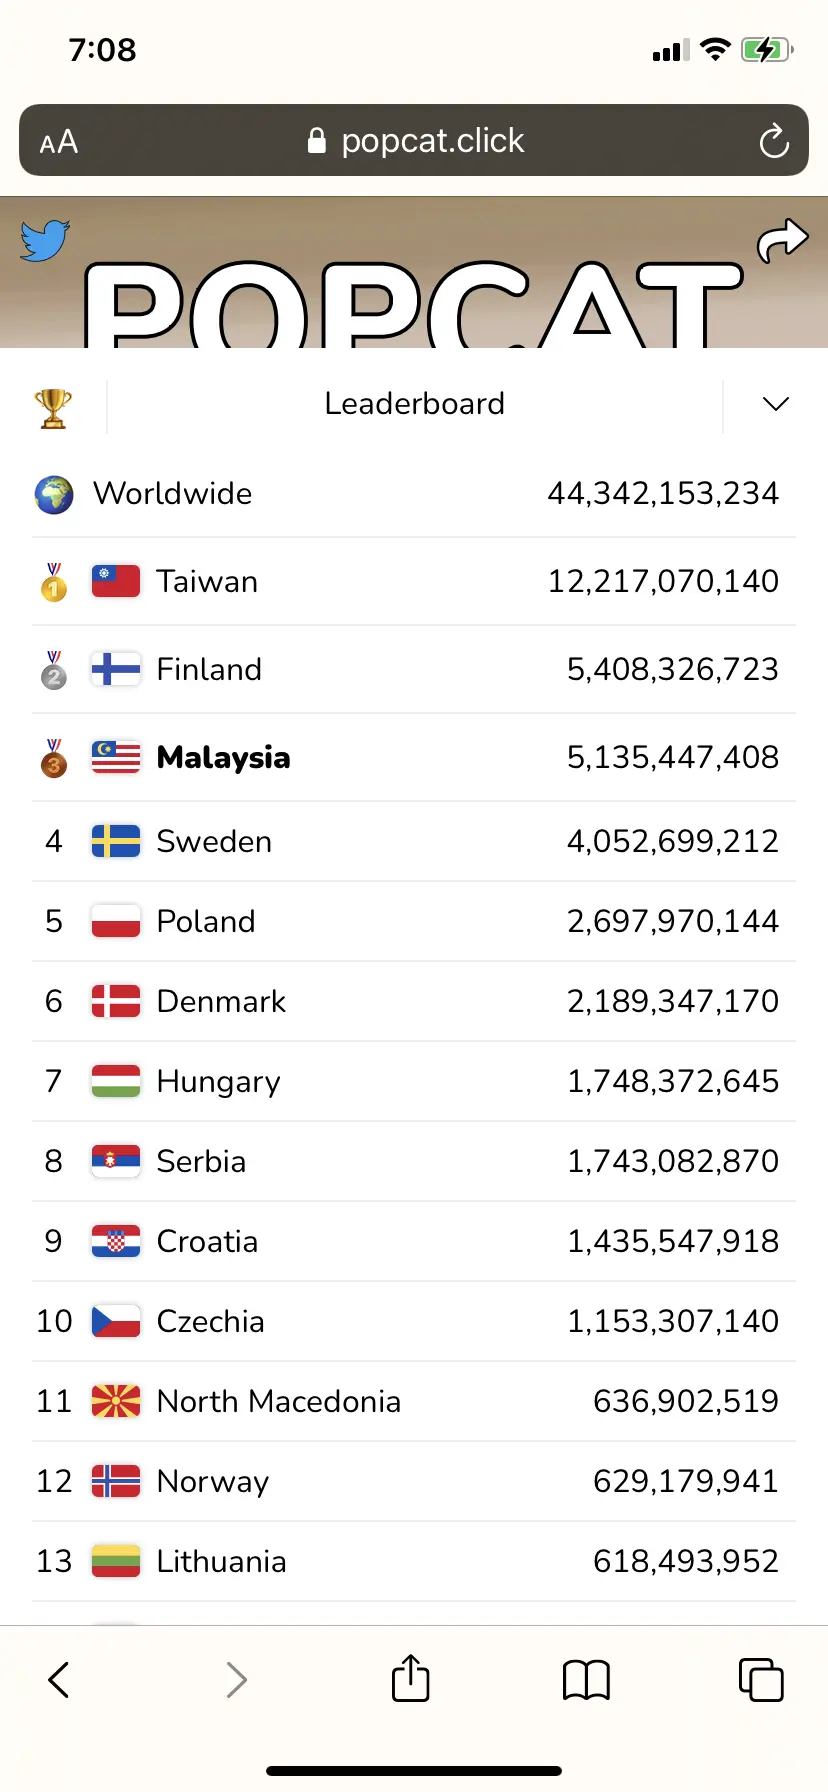 Malaysia's current ranking on popcat. Click